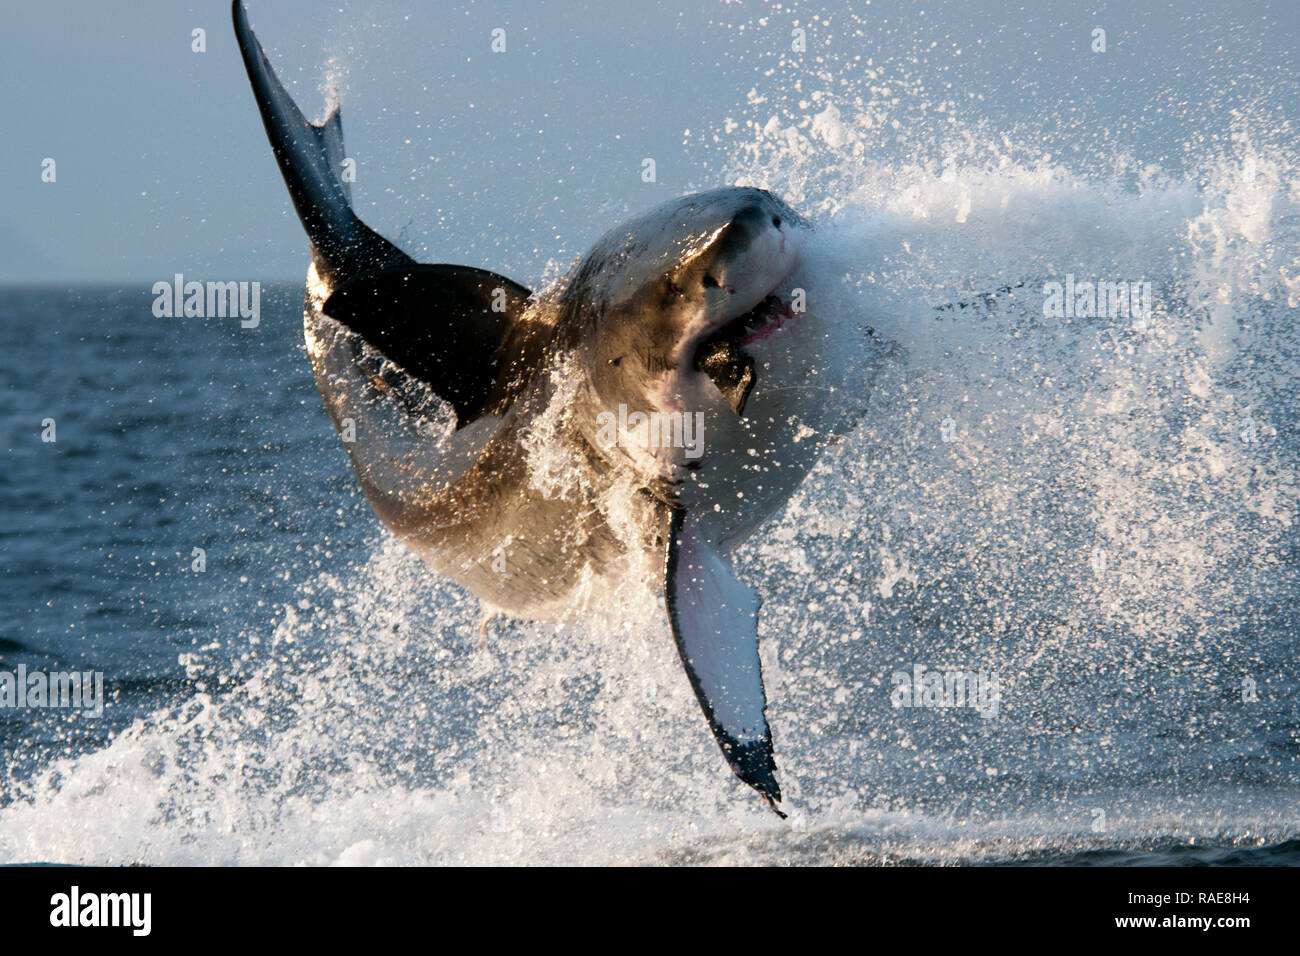 Breach. DRAMATIC images capture a huge 14 foot-long Great White shark hurtling through the air after it breached the water in search of a tasty meal.  Stock Photo